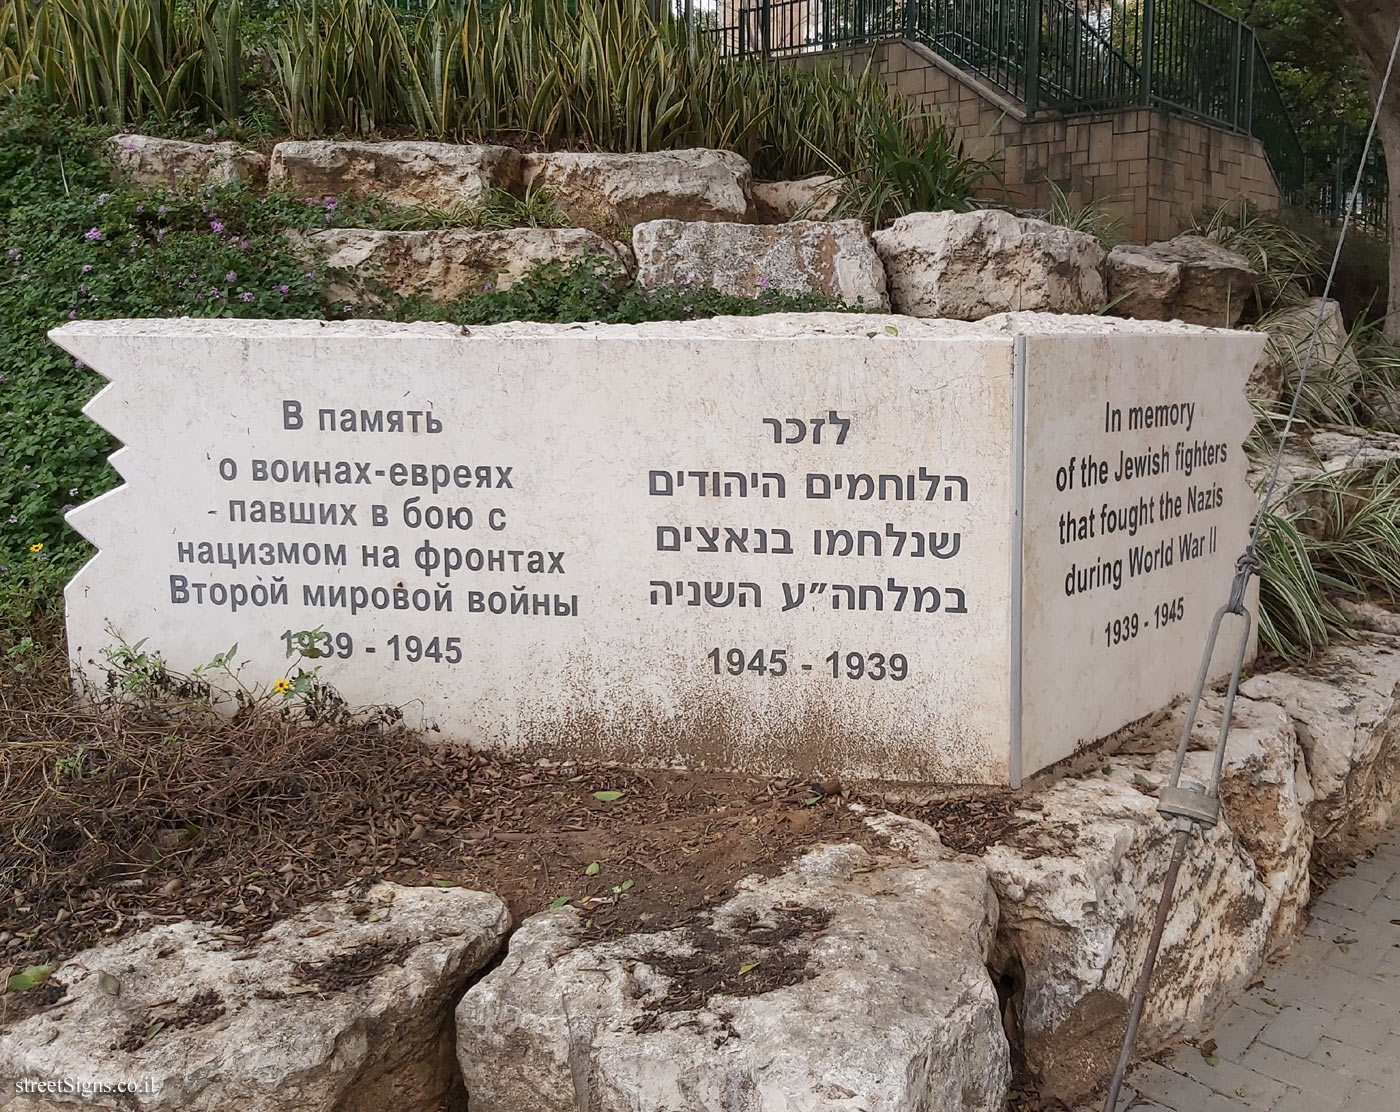 Rehovot - Garden of Heroism - a monument in memory of the Jews who fought the Nazis